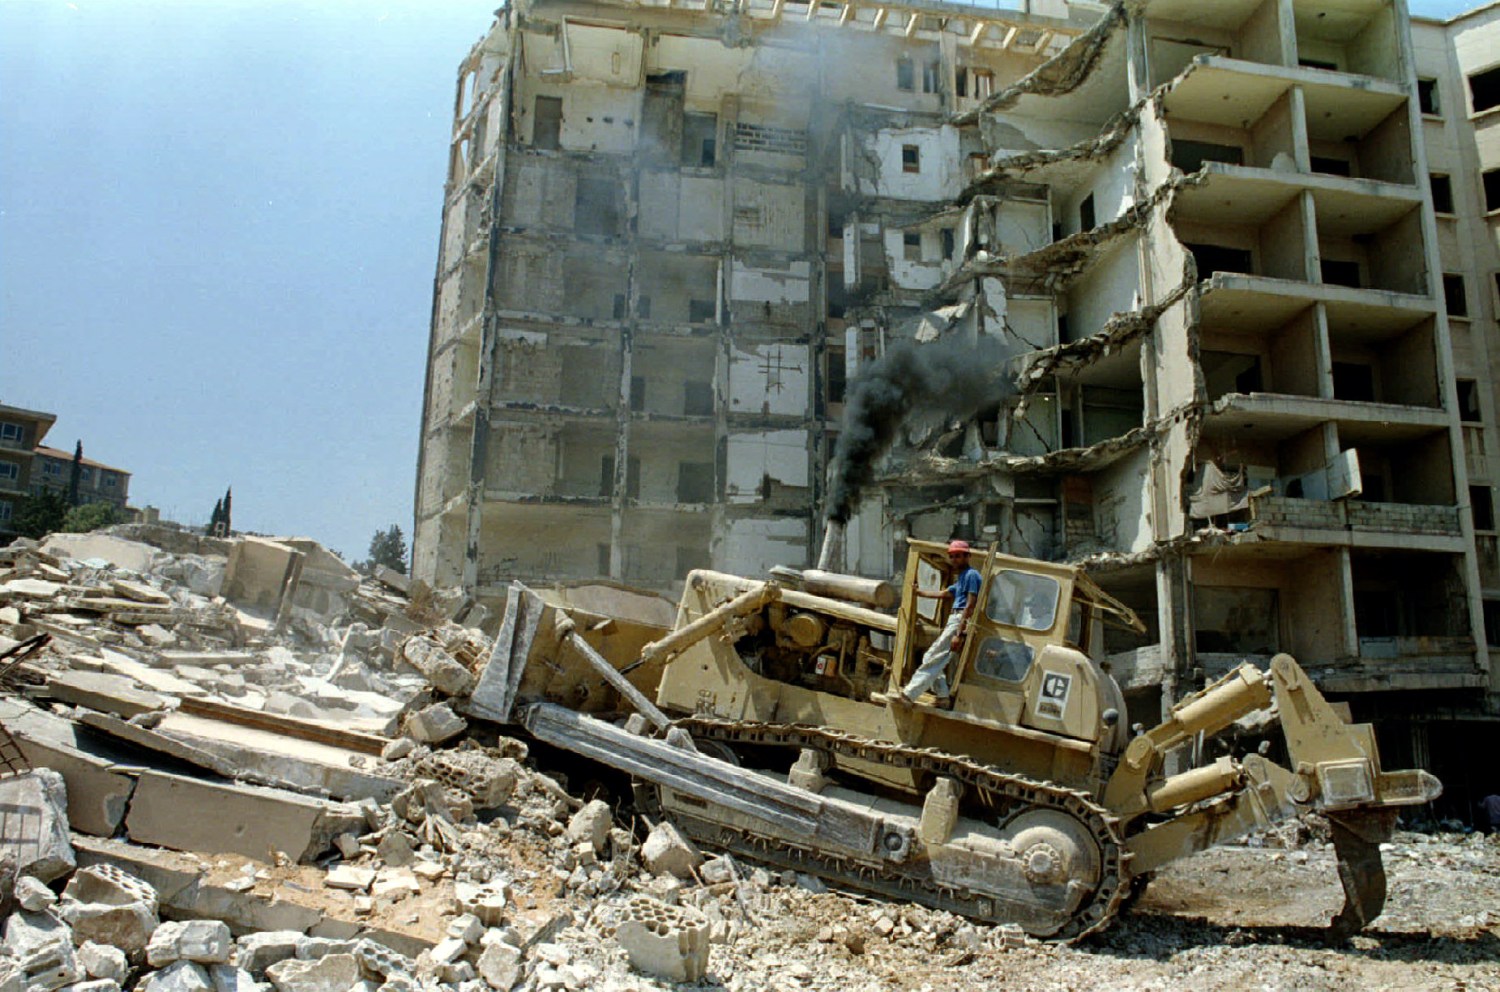 A bulldozer demolishes August 7 the bombed out building of the American embassy in Beirut. The embassy, in the mainly-moslem sector, was wrecked in a suicide attack by a pro-Iranian militant that Killed 17 Americans in 1983 - RTXFAWK